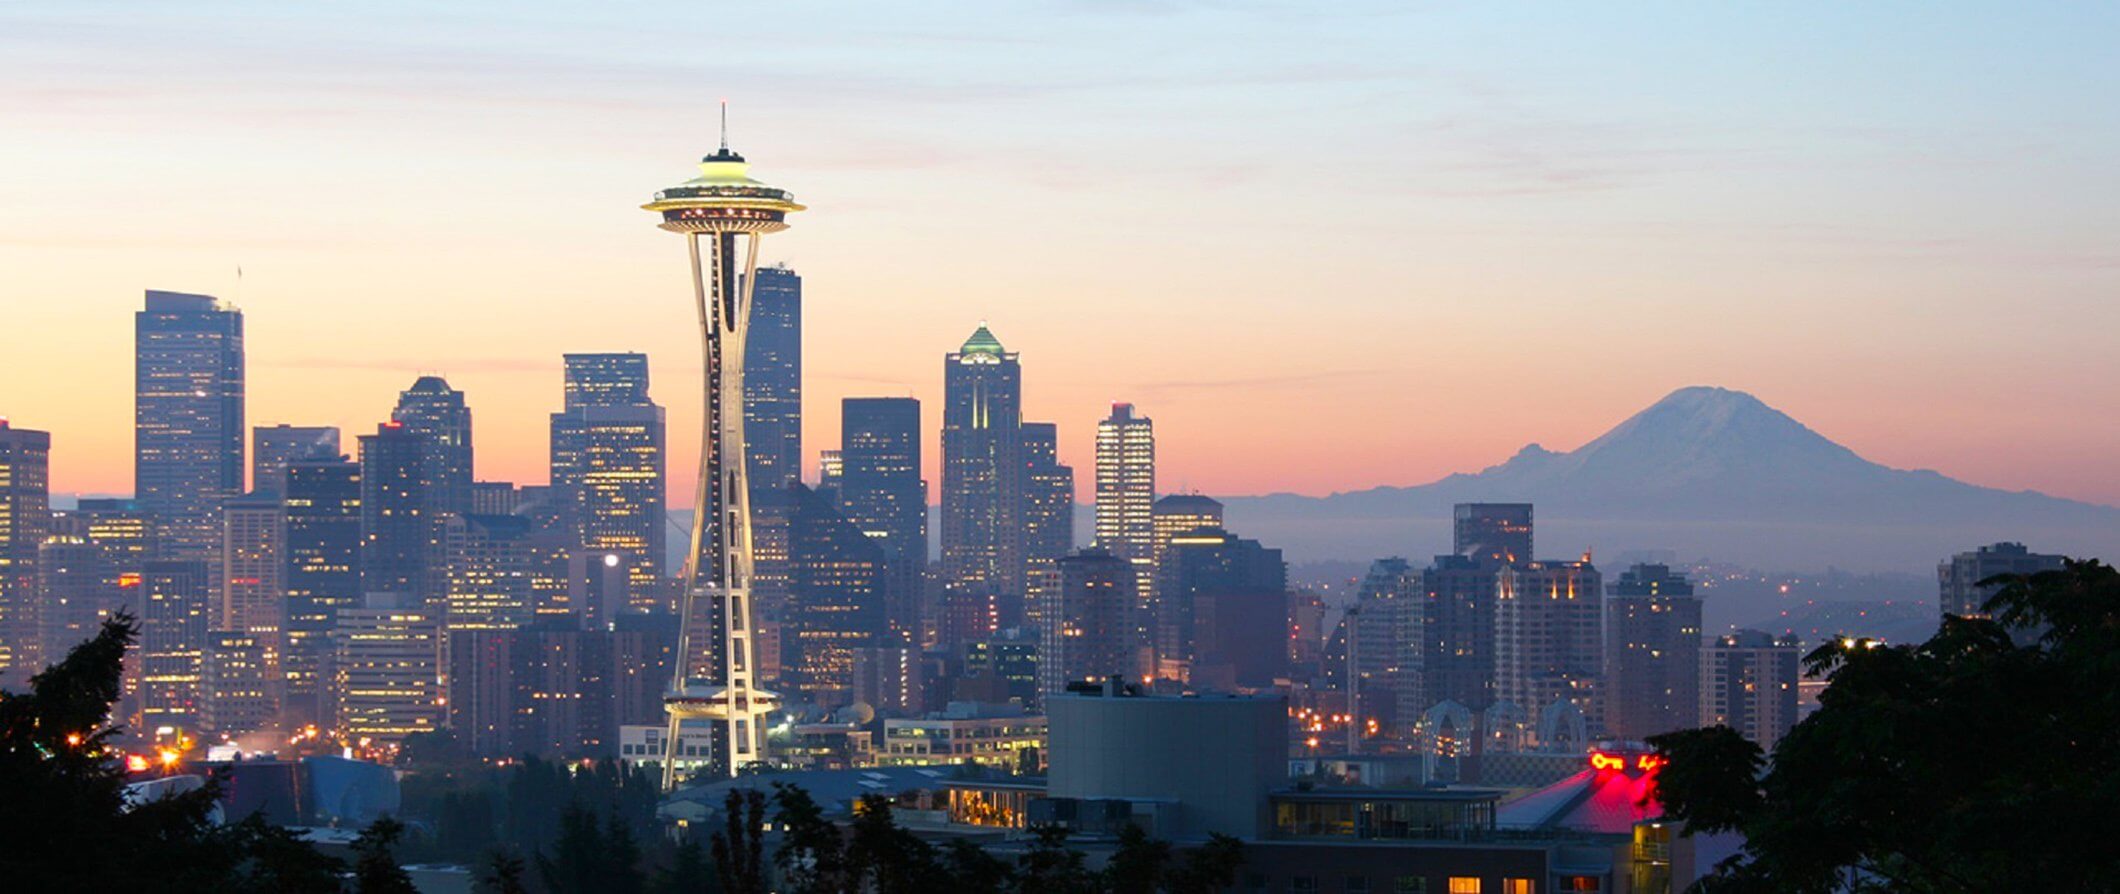 Iconic areal image of Seattle skyline with the space needle